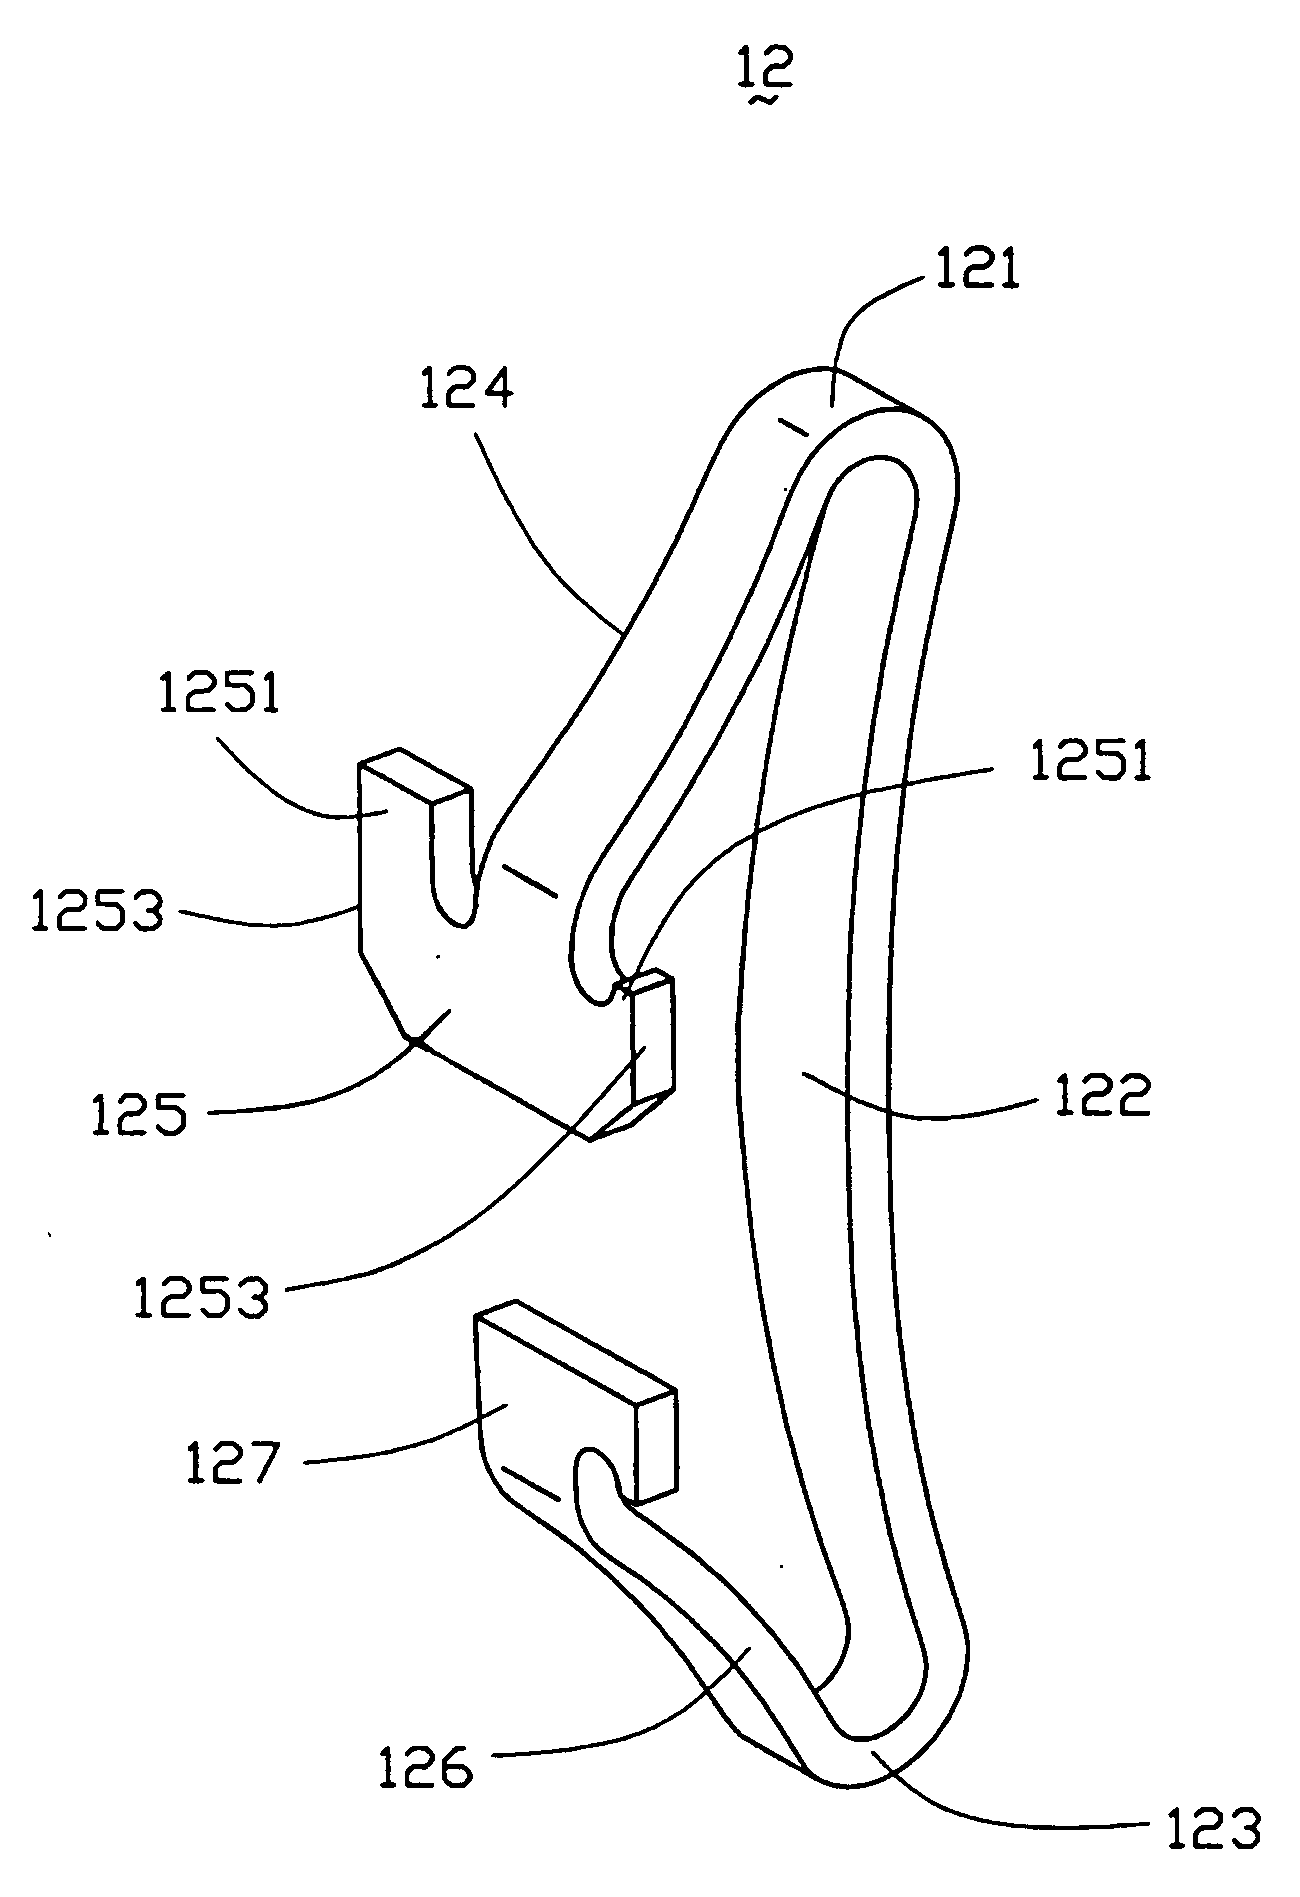 Contact for an electrical connector